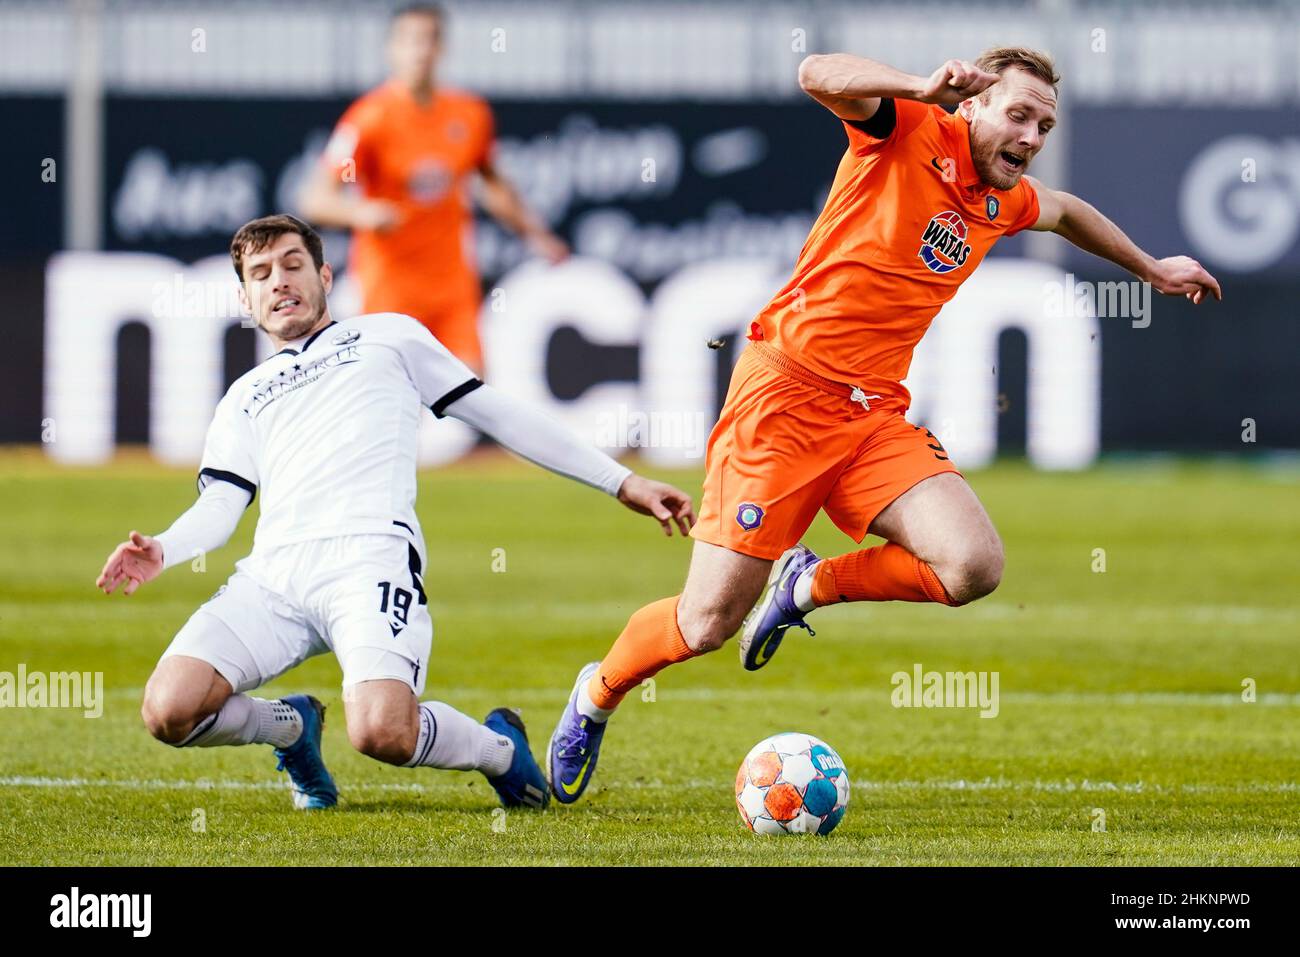 Sandhausen, Germany. 05th Feb, 2022. Soccer: 2. Bundesliga, SV Sandhausen - FC Erzgebirge Aue, Matchday 21, BWT-Stadion am Hardtwald. Sandhausen's Bashkim Ajdini (l) and Ben Zolinski of Erzgebirge Aue fight for the ball. Credit: Uwe Anspach/dpa - IMPORTANT NOTE: In accordance with the requirements of the DFL Deutsche Fußball Liga and the DFB Deutscher Fußball-Bund, it is prohibited to use or have used photographs taken in the stadium and/or of the match in the form of sequence pictures and/or video-like photo series./dpa/Alamy Live News Stock Photo